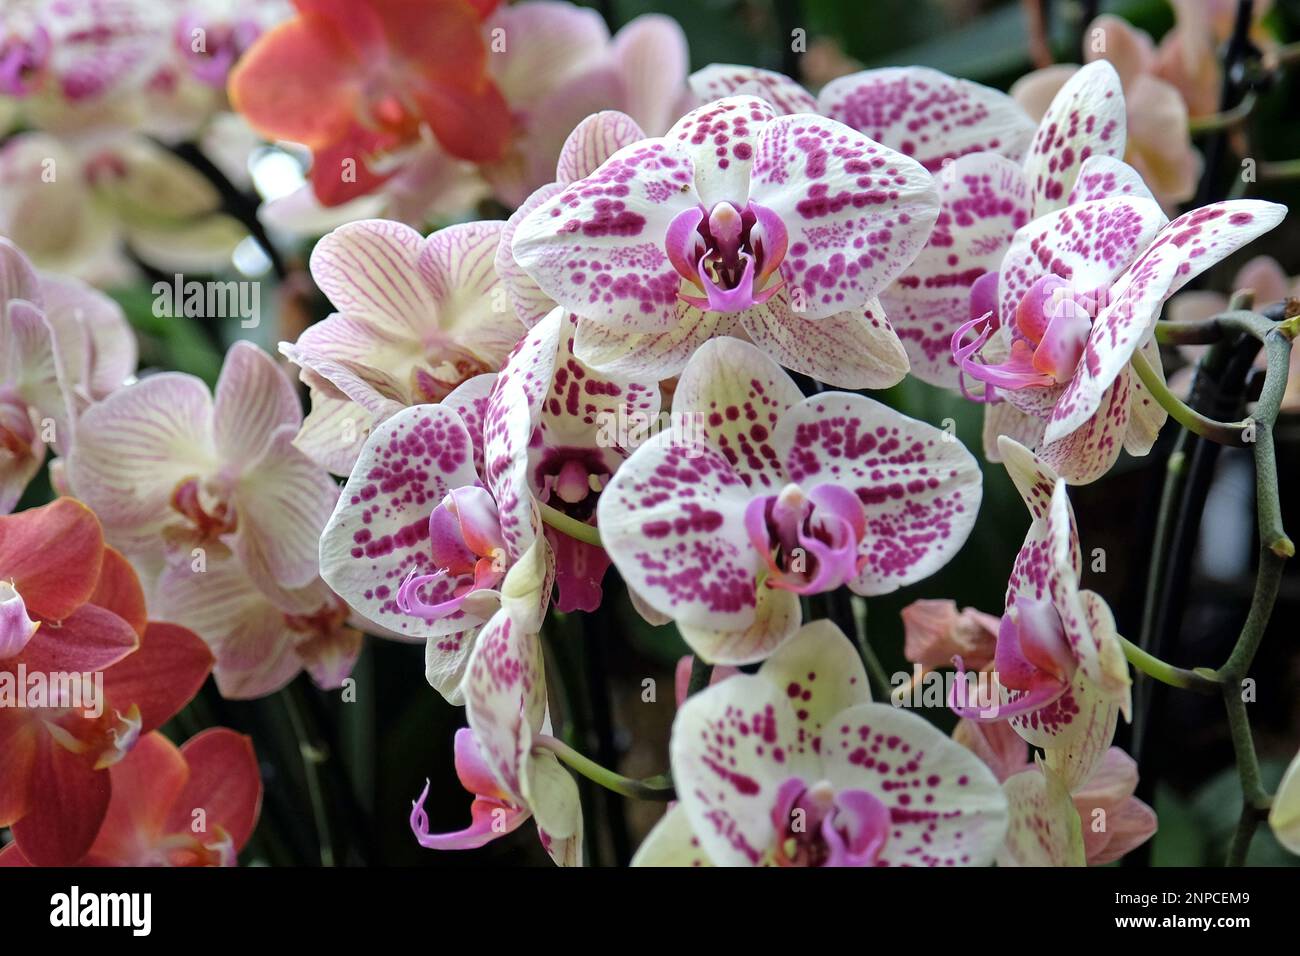 Cream and purple spotted phalaenopsis moth orchids in flower. Stock Photo